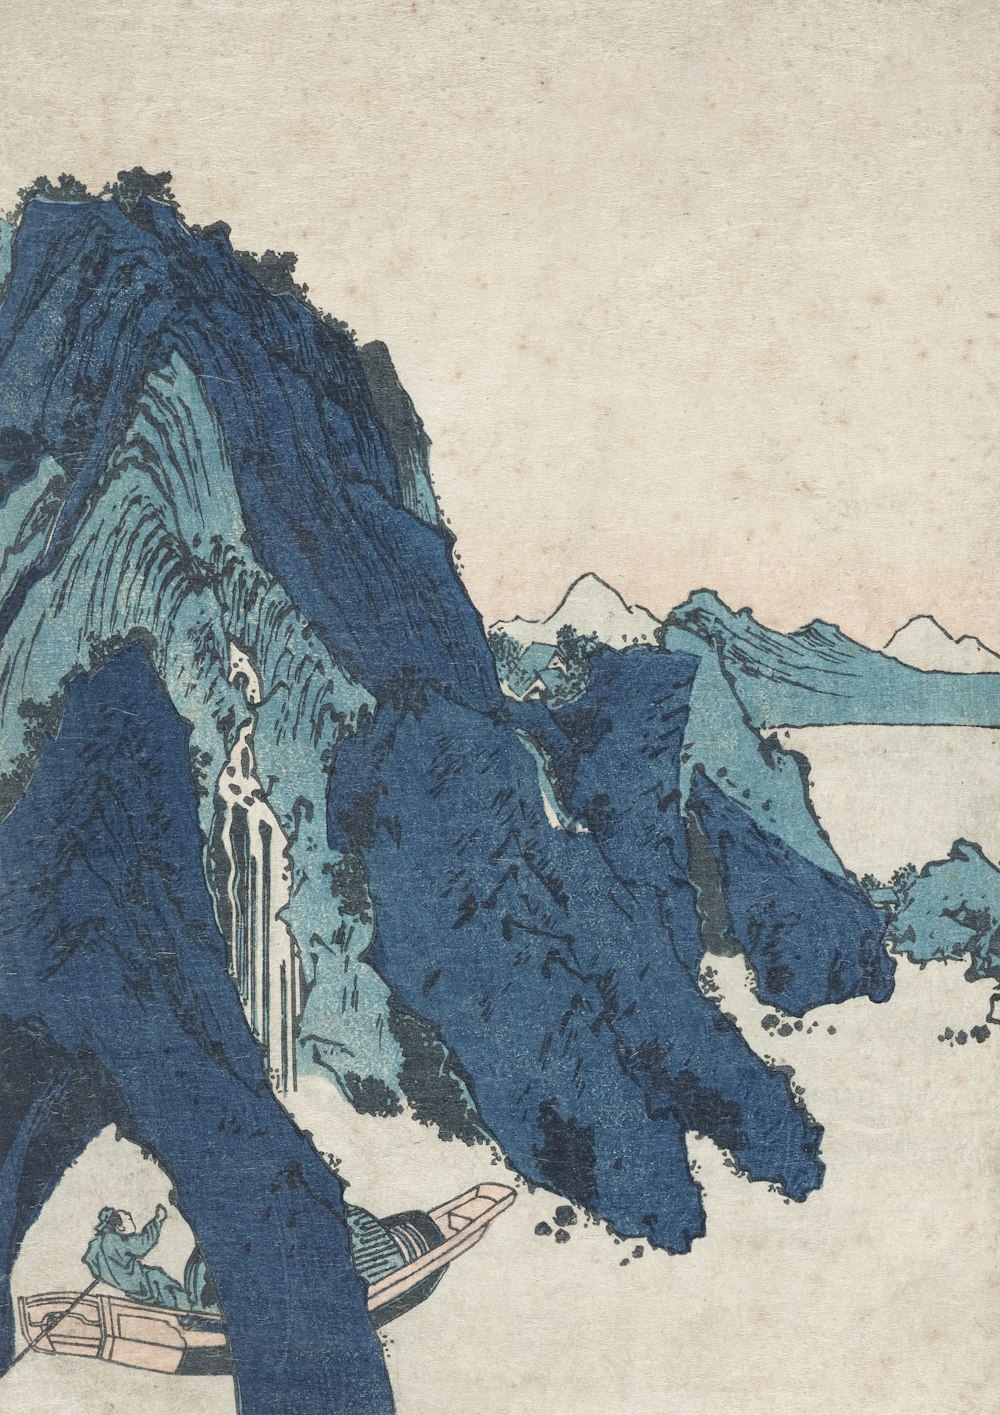 a painting of a mountain with a person on a surfboard